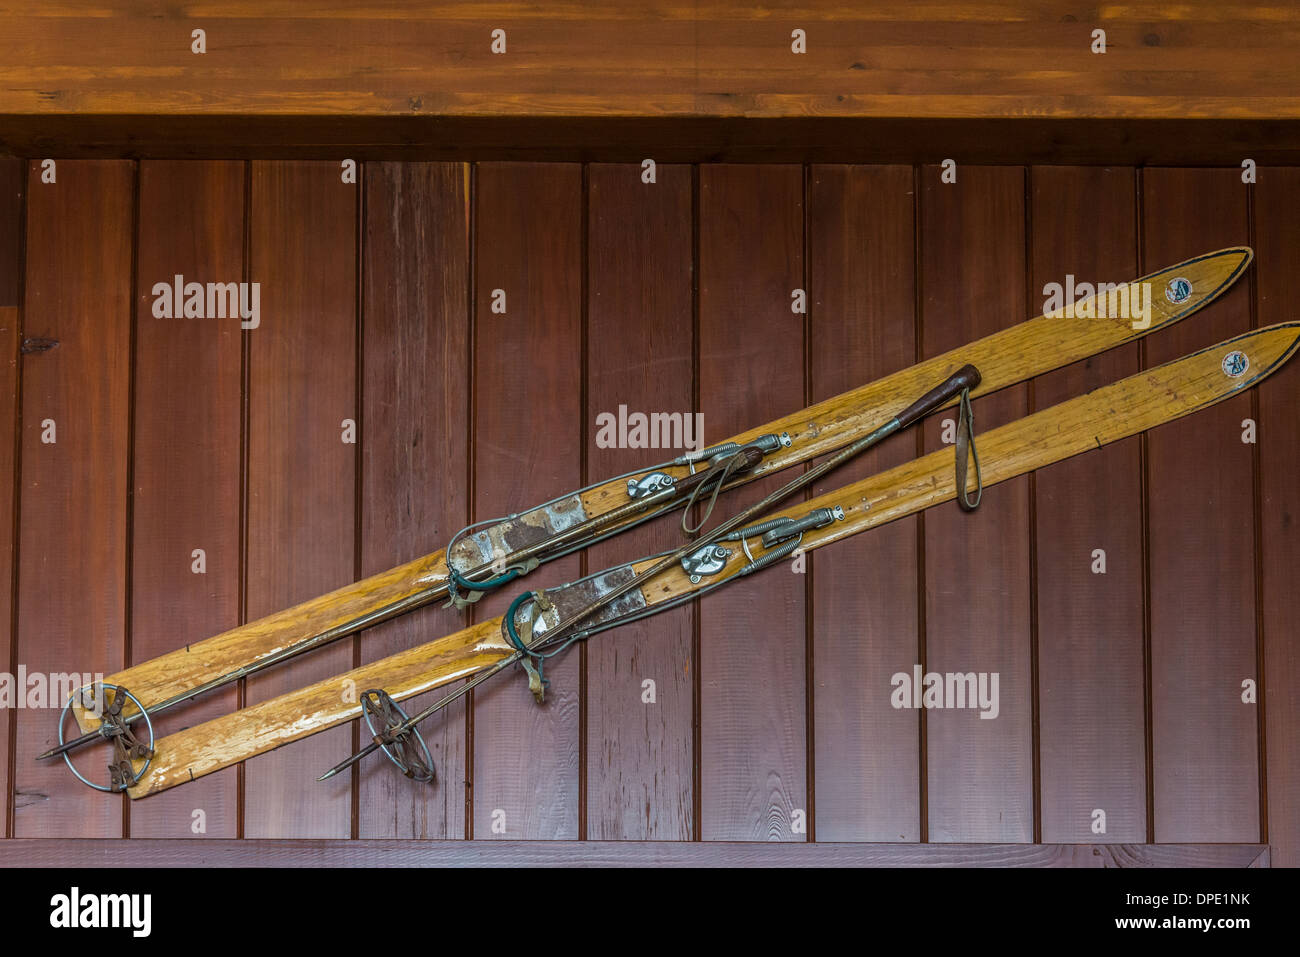 A pair of old style wooden skis hanging on the wall. Stock Photo